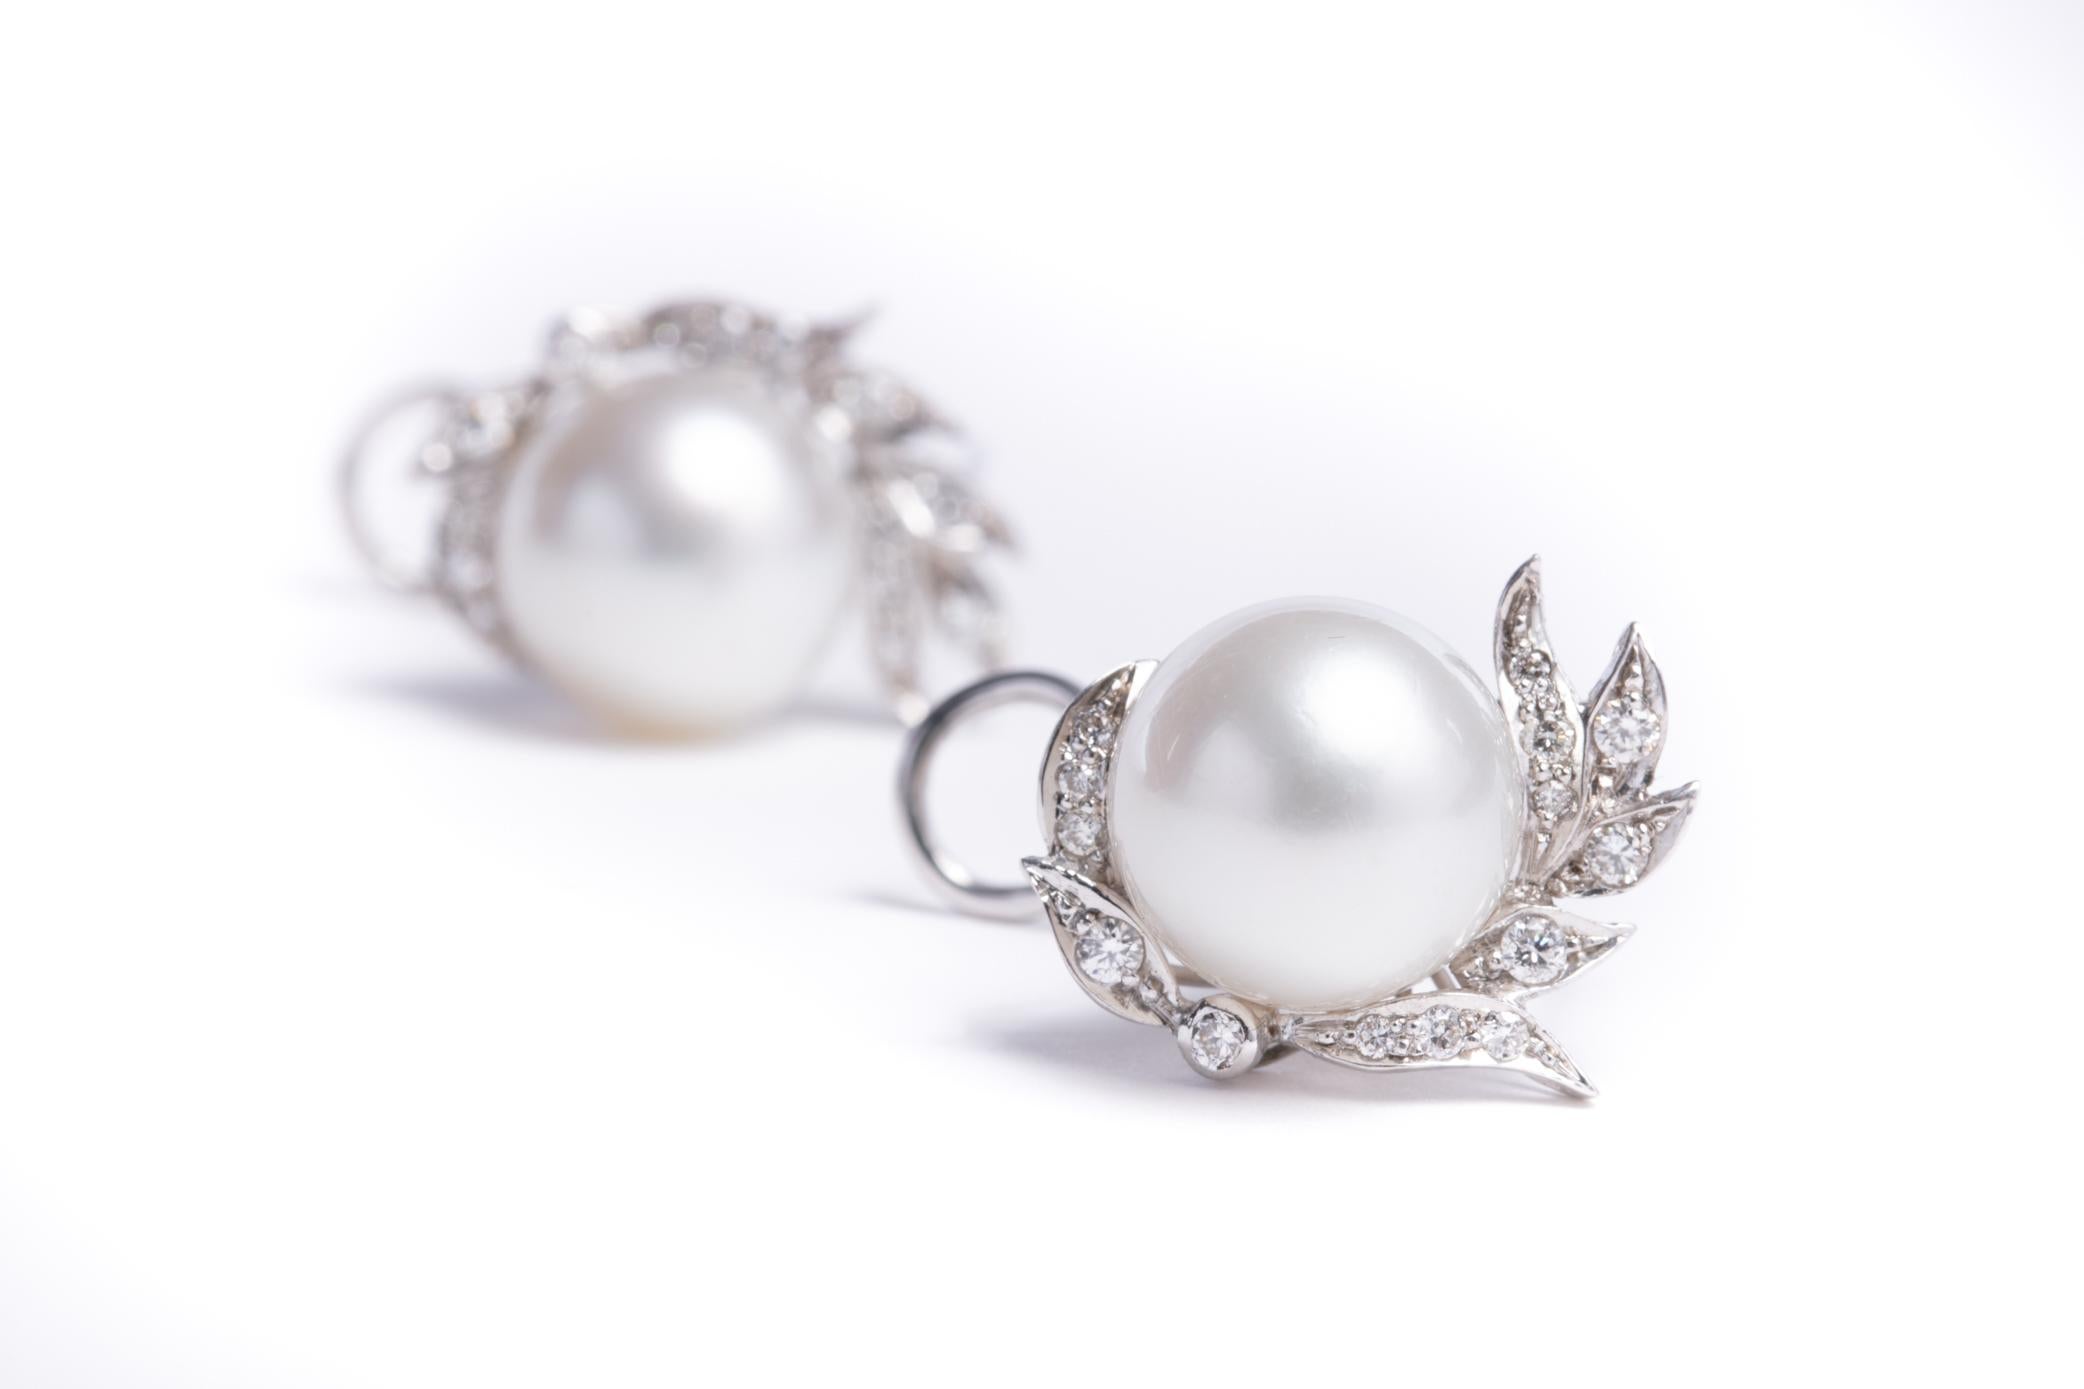 Cultured Pearl and Diamond Earrings Set in 18 Karat White Gold and Diamonds 6